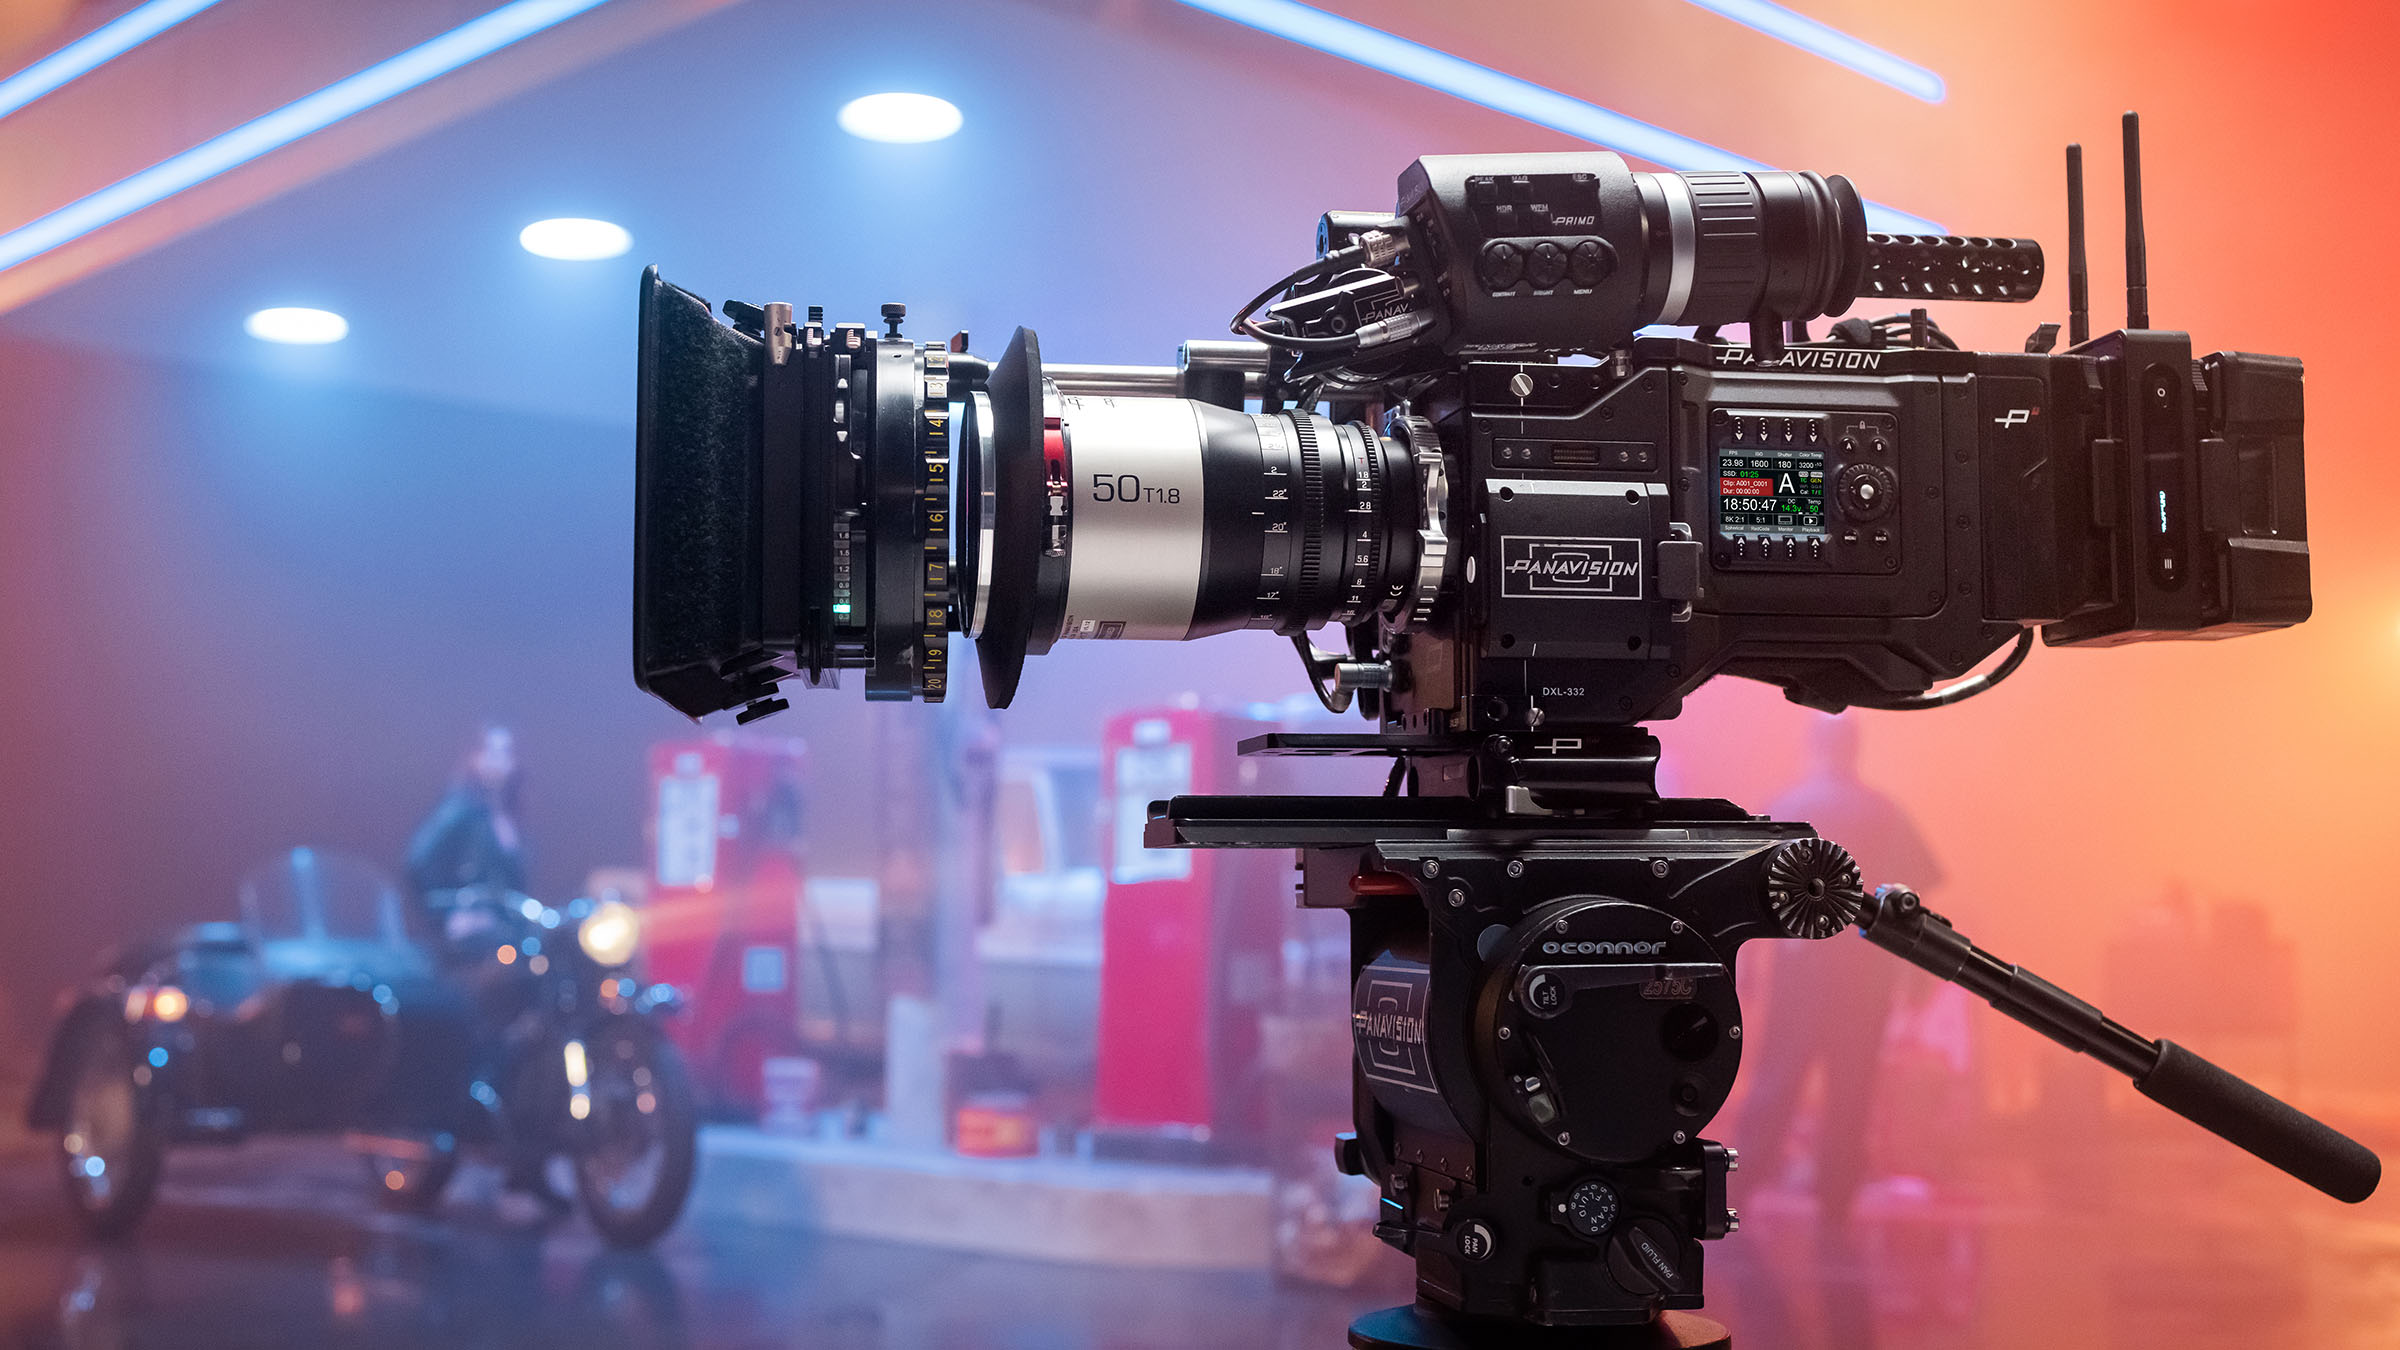 The Teradek Serv 4K can be mounted between camera and battery.